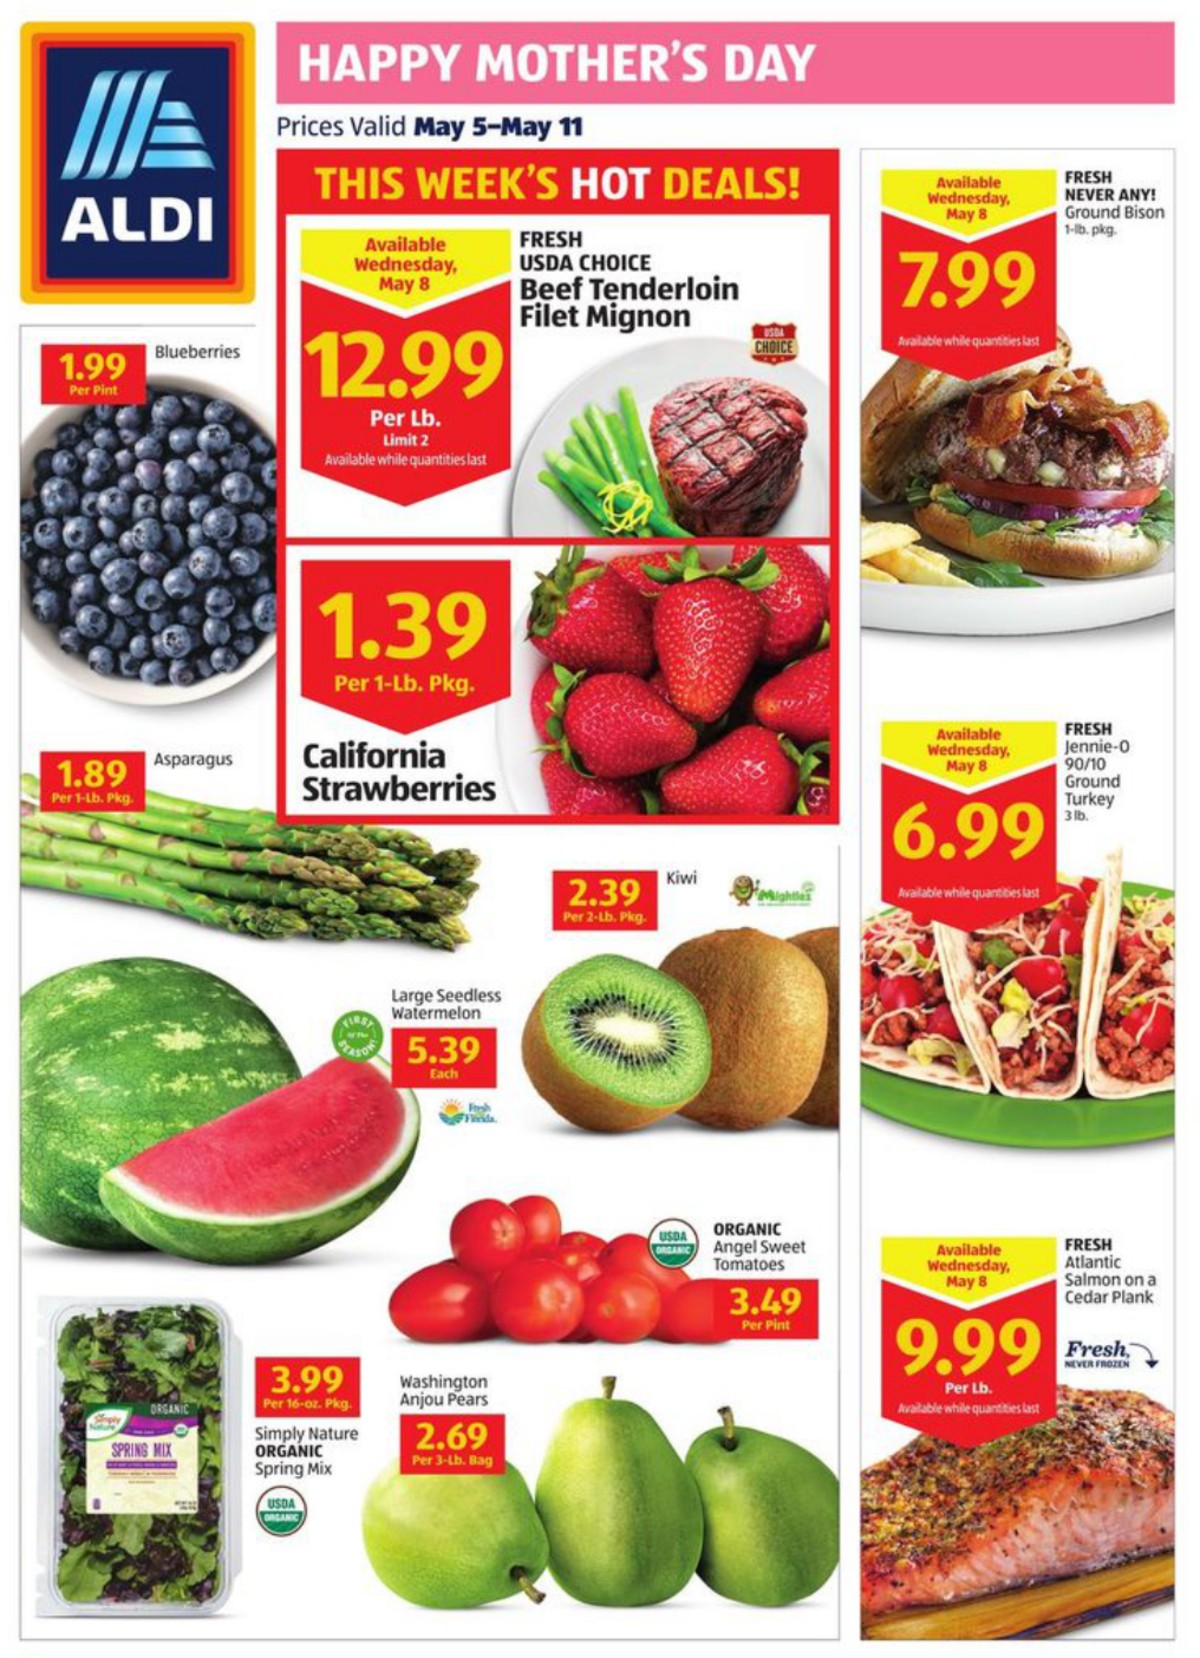 ALDI US Weekly Ads & Special Buys from May 5